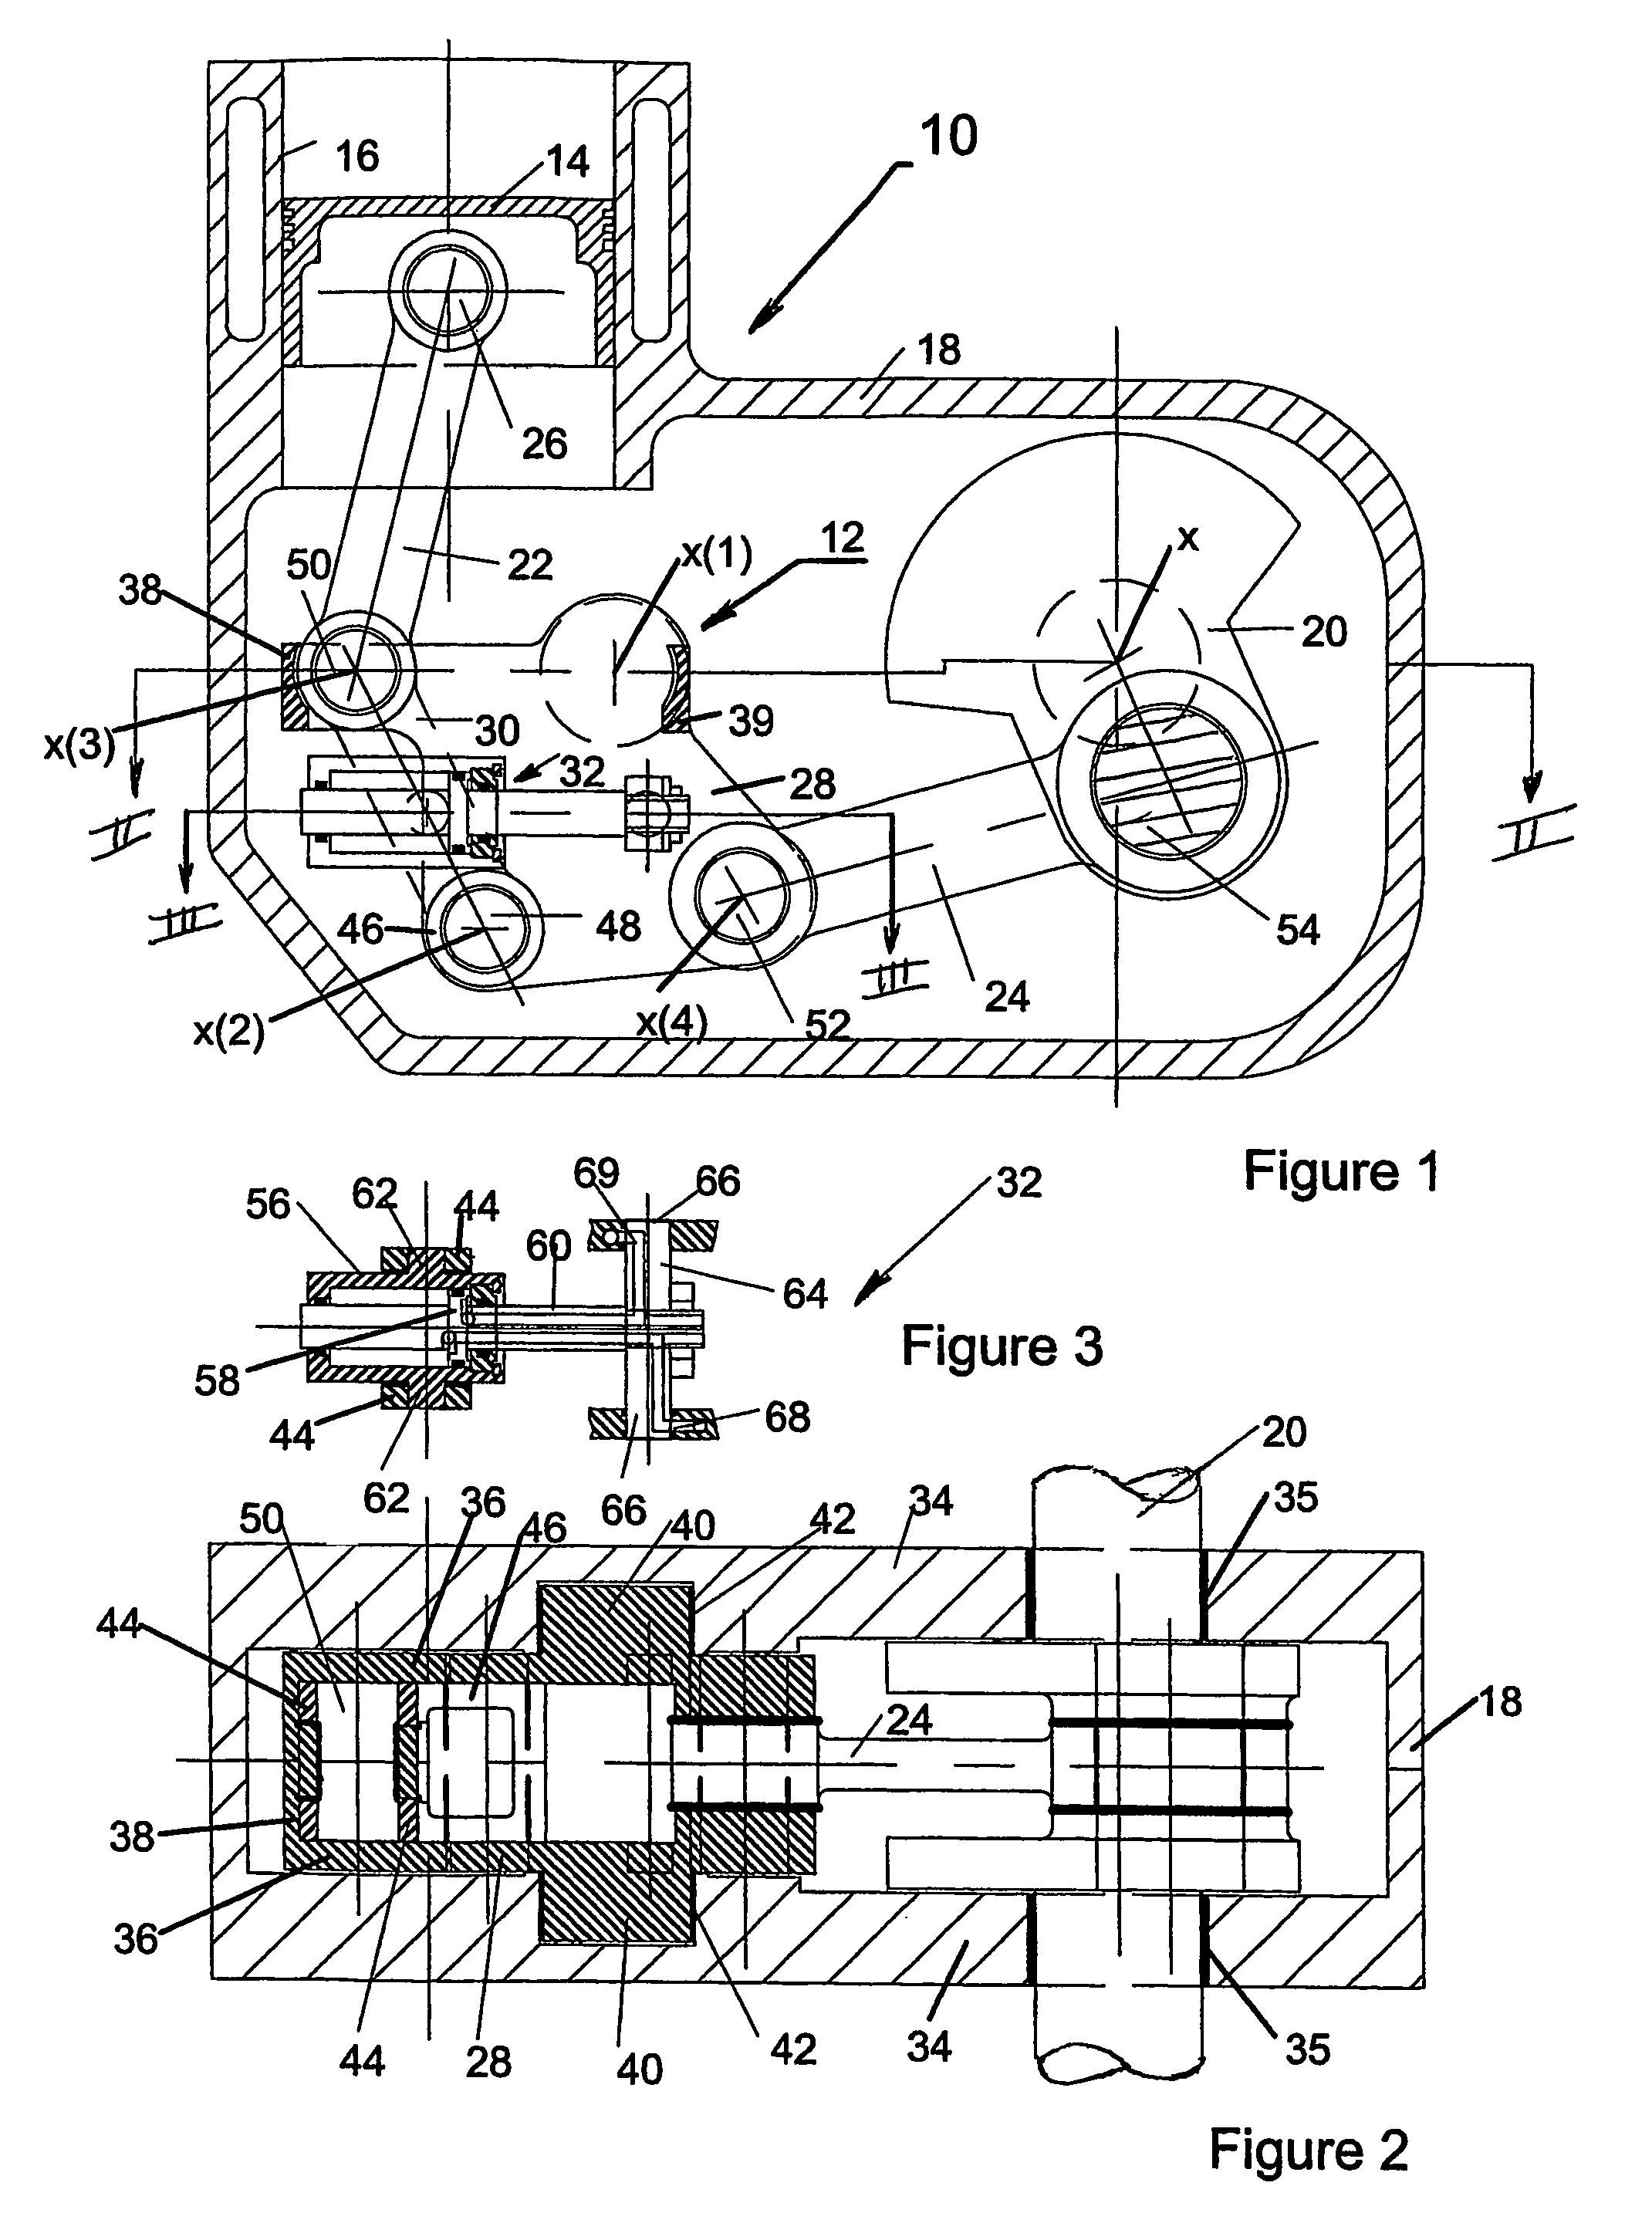 Mechanism for internal combustion piston engines